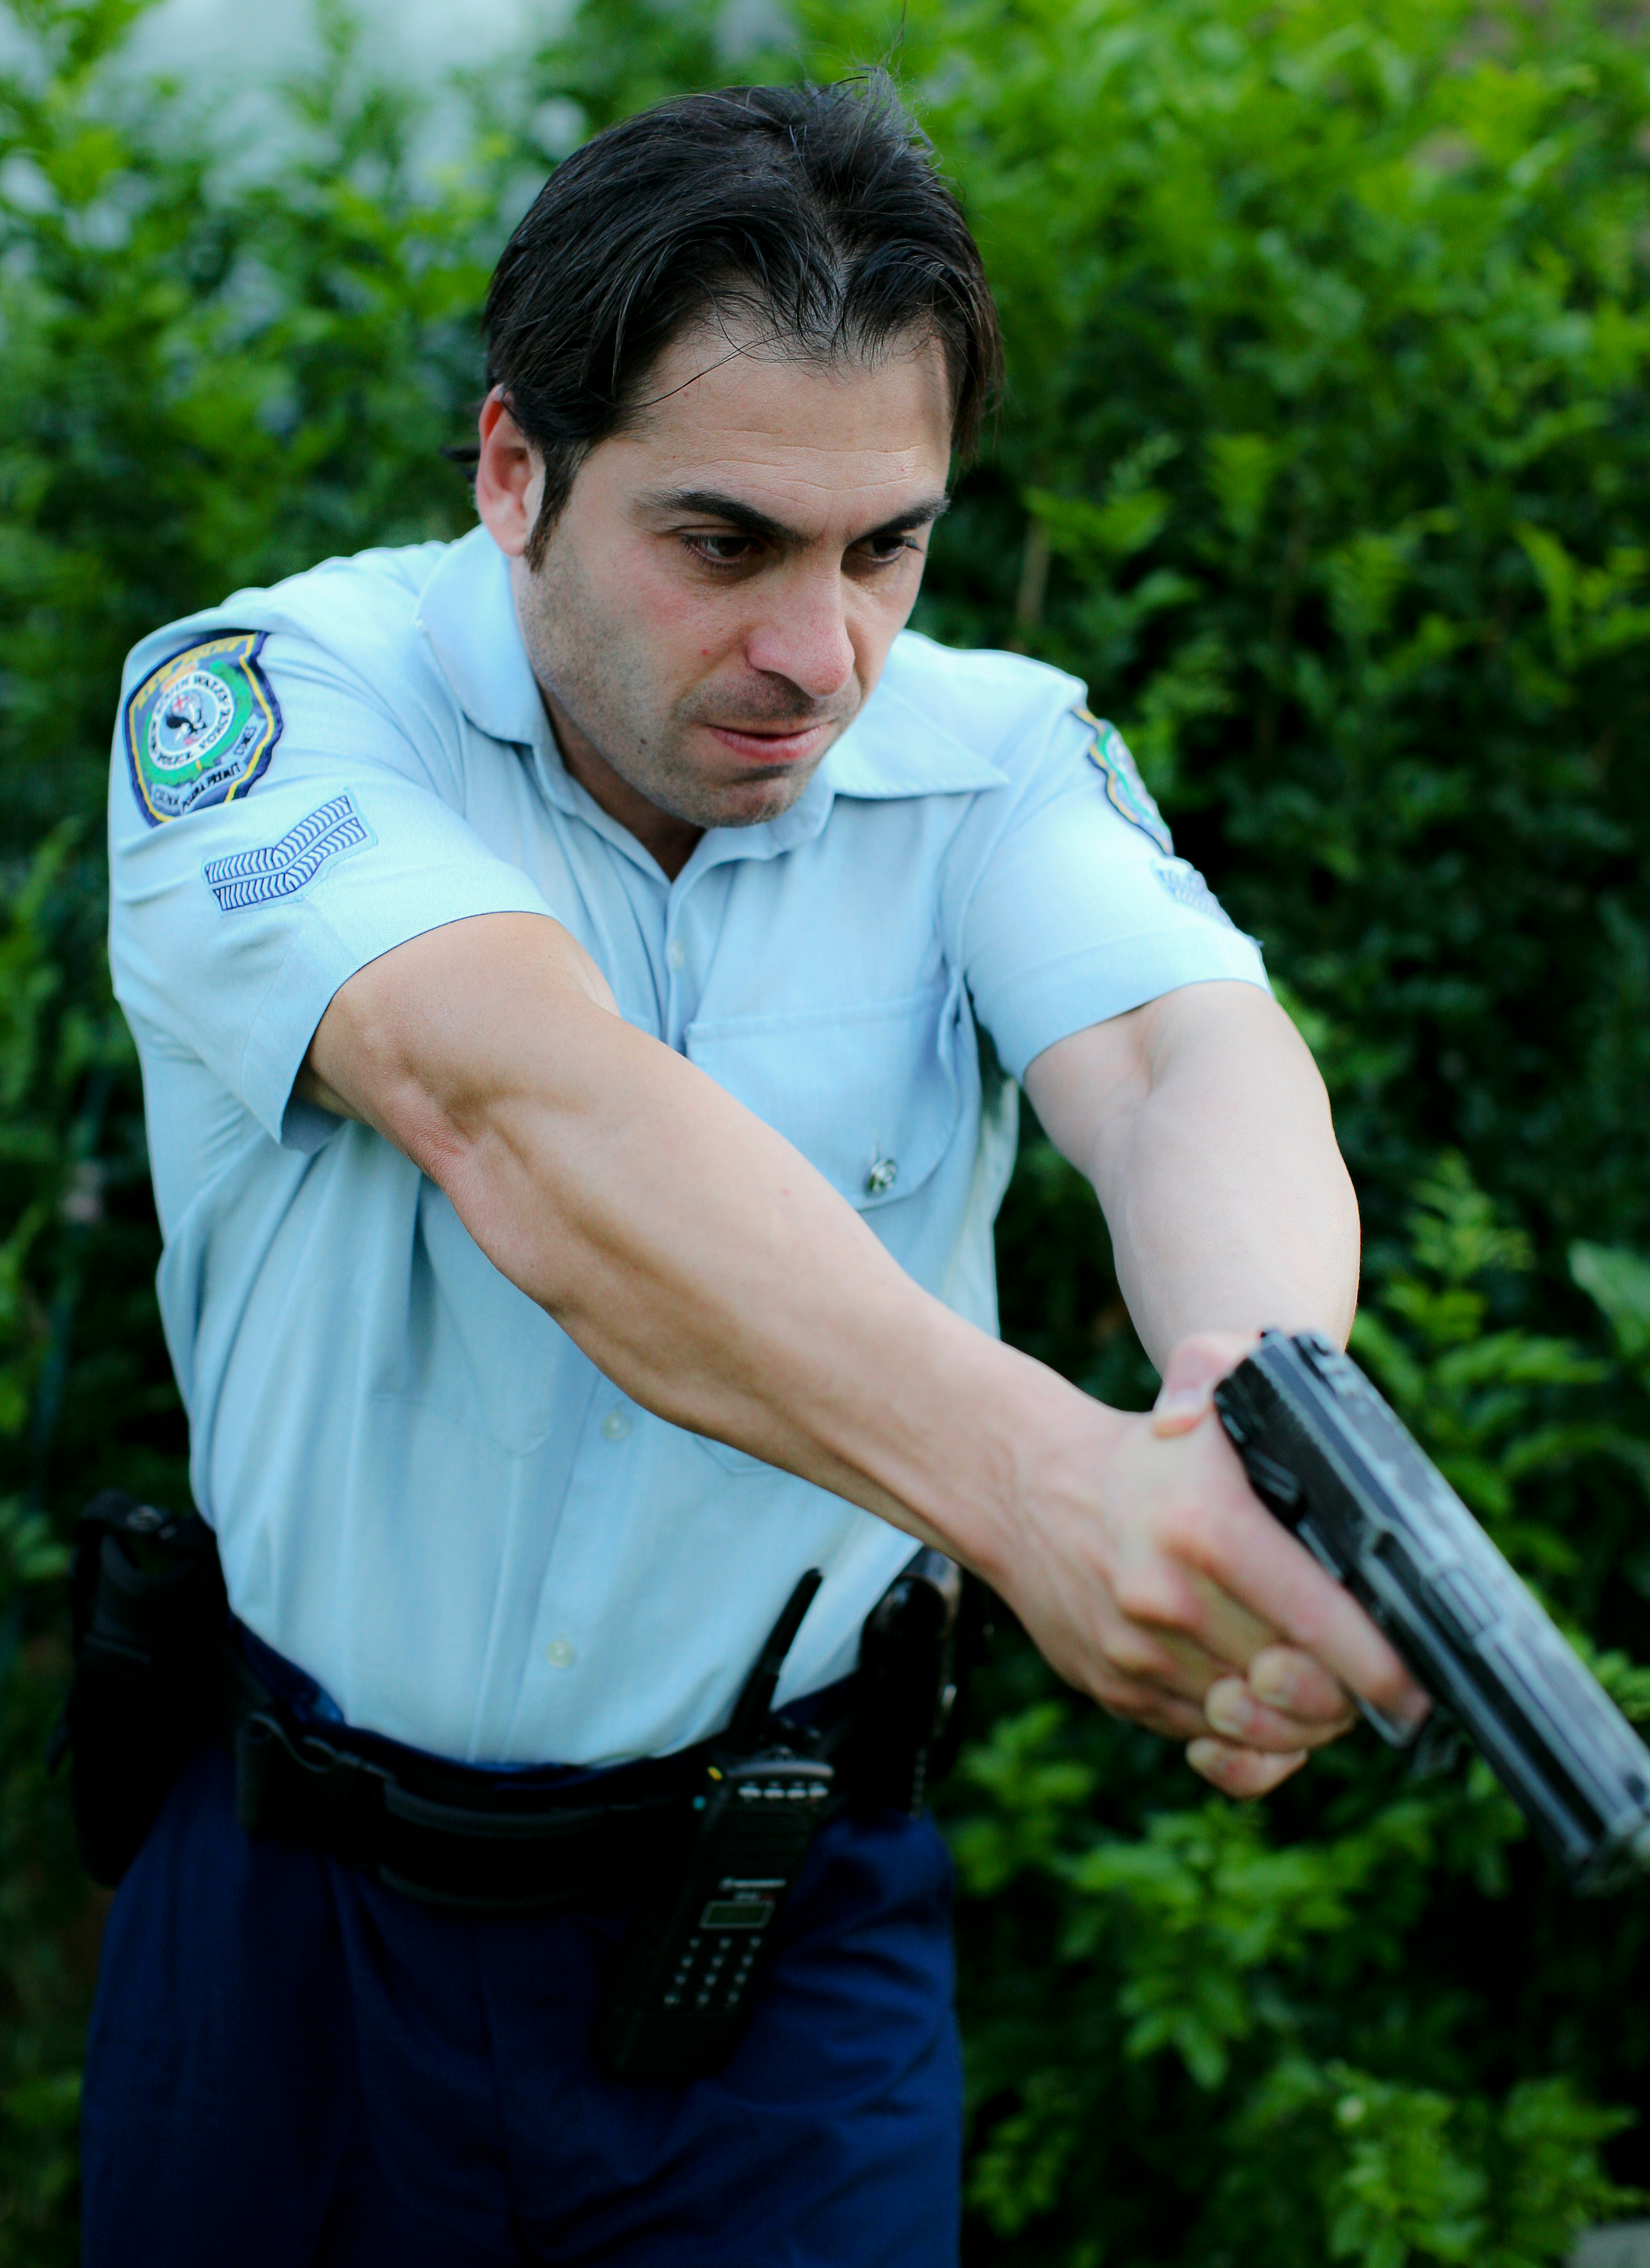 Still of Bobey Taleb in Horizon's Crossing, playing the role of a Police Officer/Constable Nick Francis.